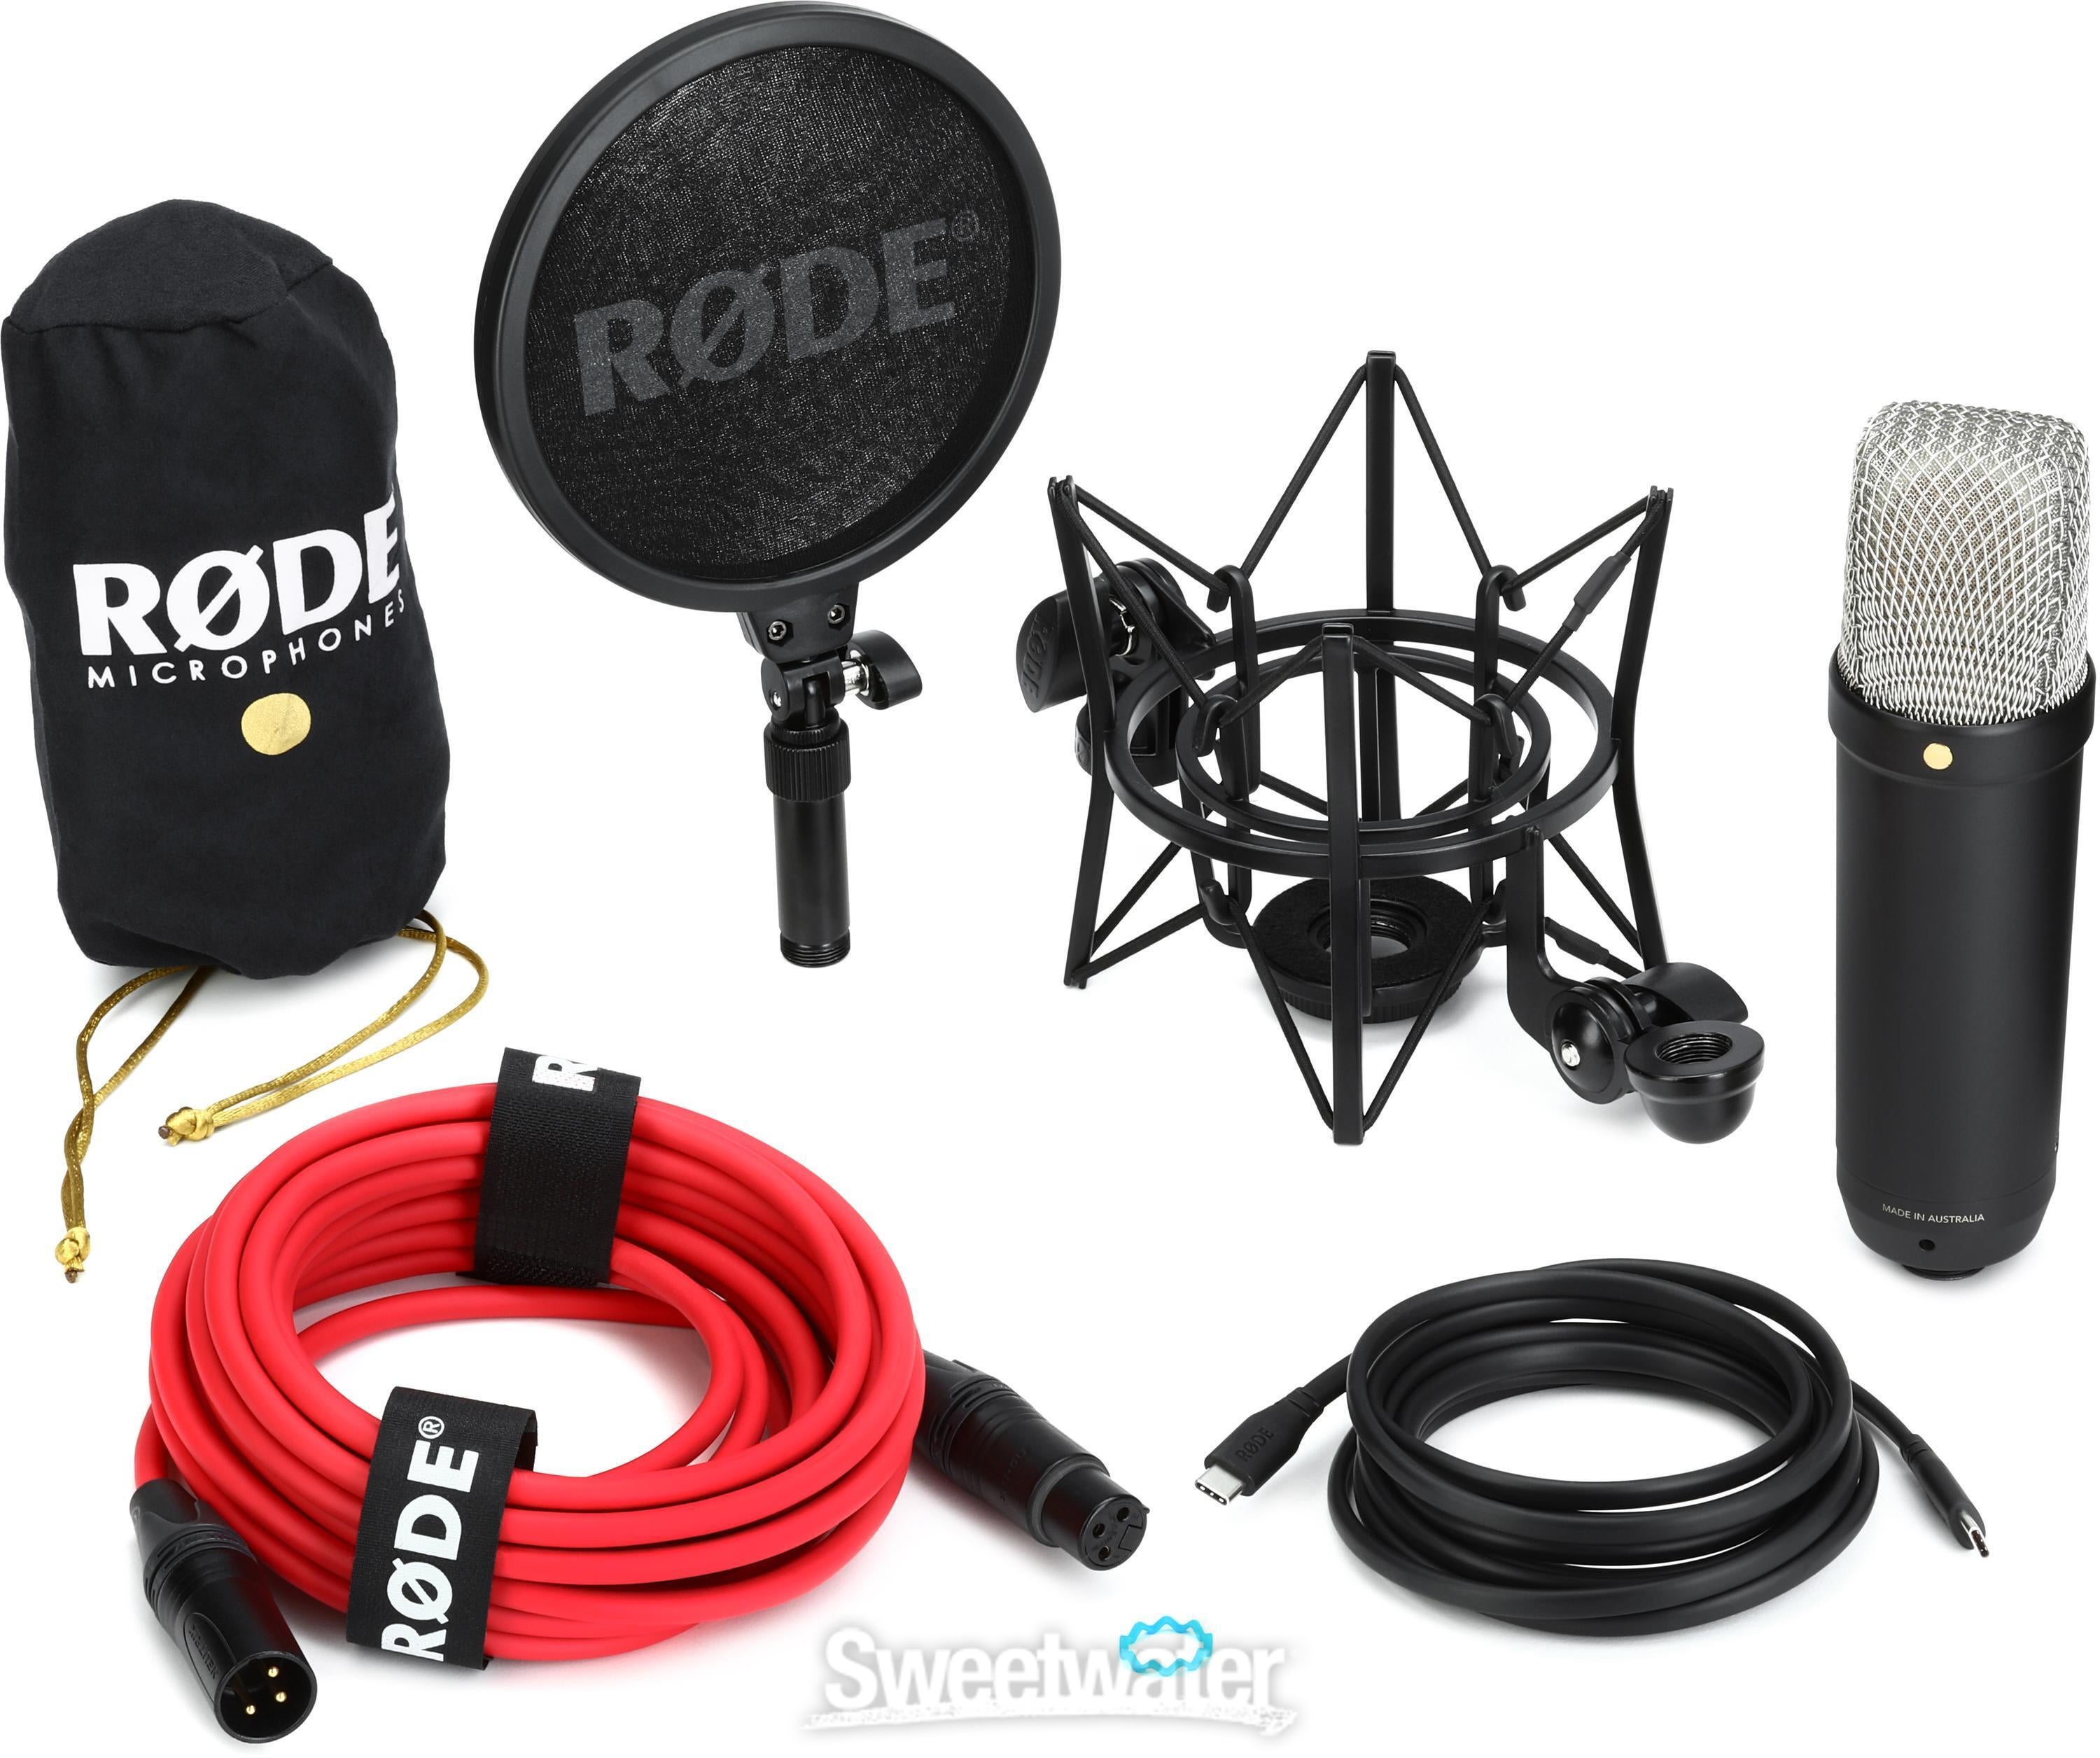 Shockmount　Sweetwater　Condenser　Rode　and　Filter　NT1　Generation　Pop　Microphone　5th　SM6　with　Black